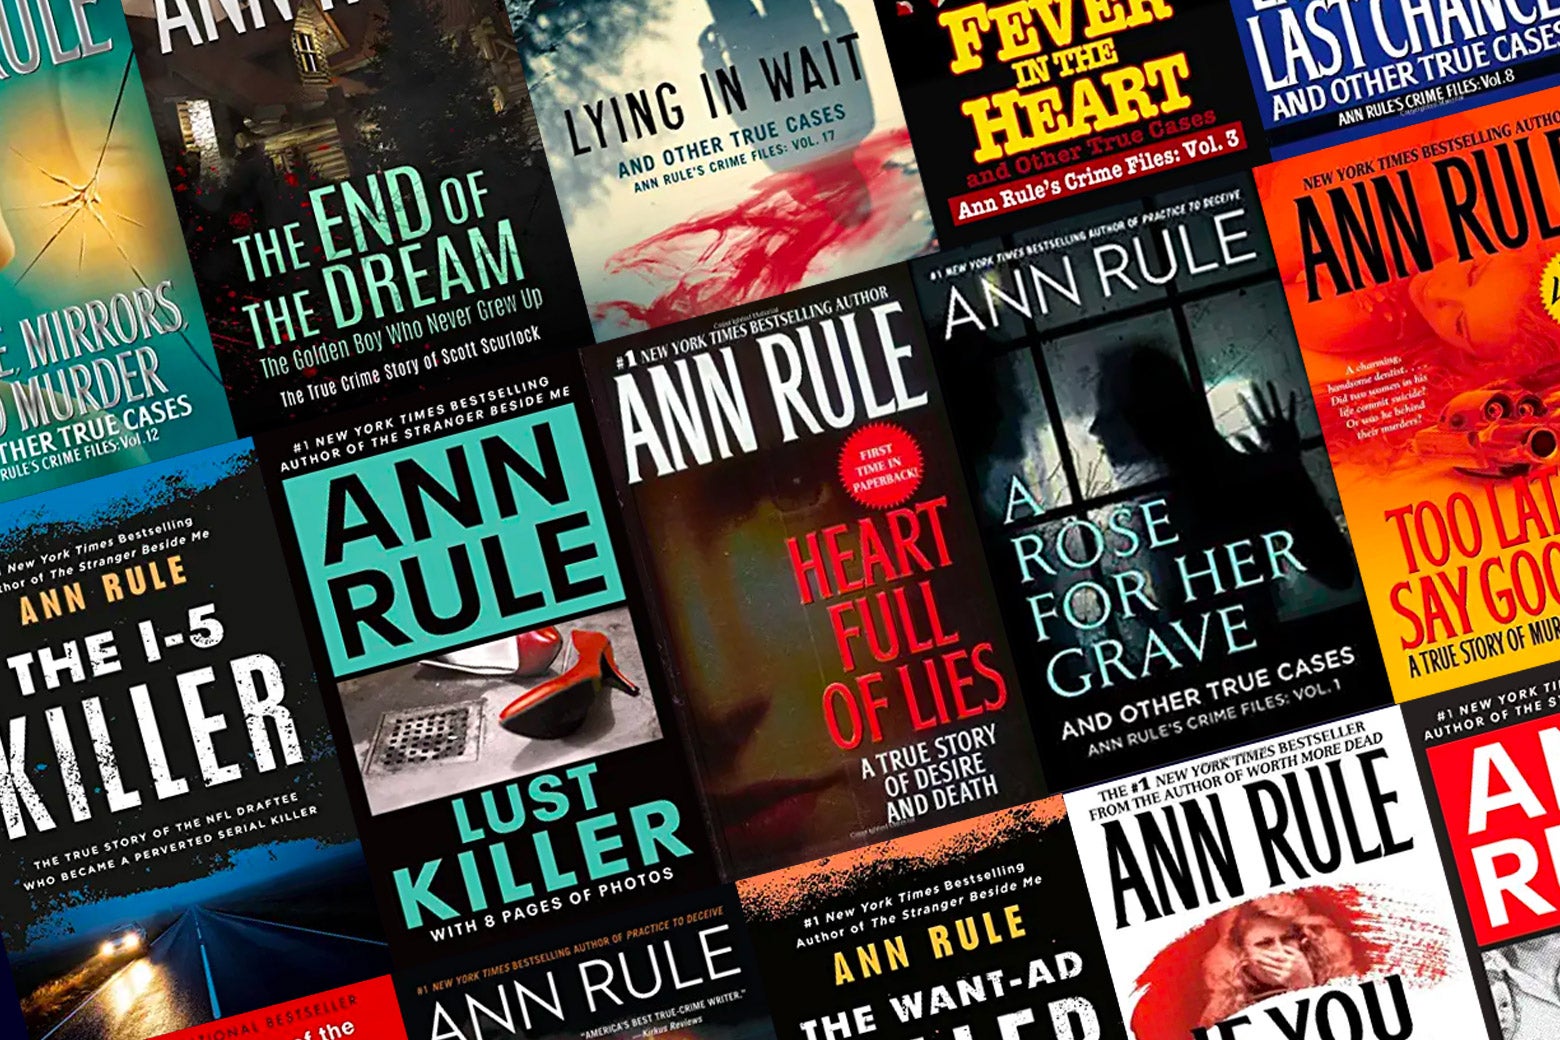 A collage of various Ann Rule titles, including The I-5 Killer, Lust Killer, Heart Full of Lies, and A Rose for Her Grave.